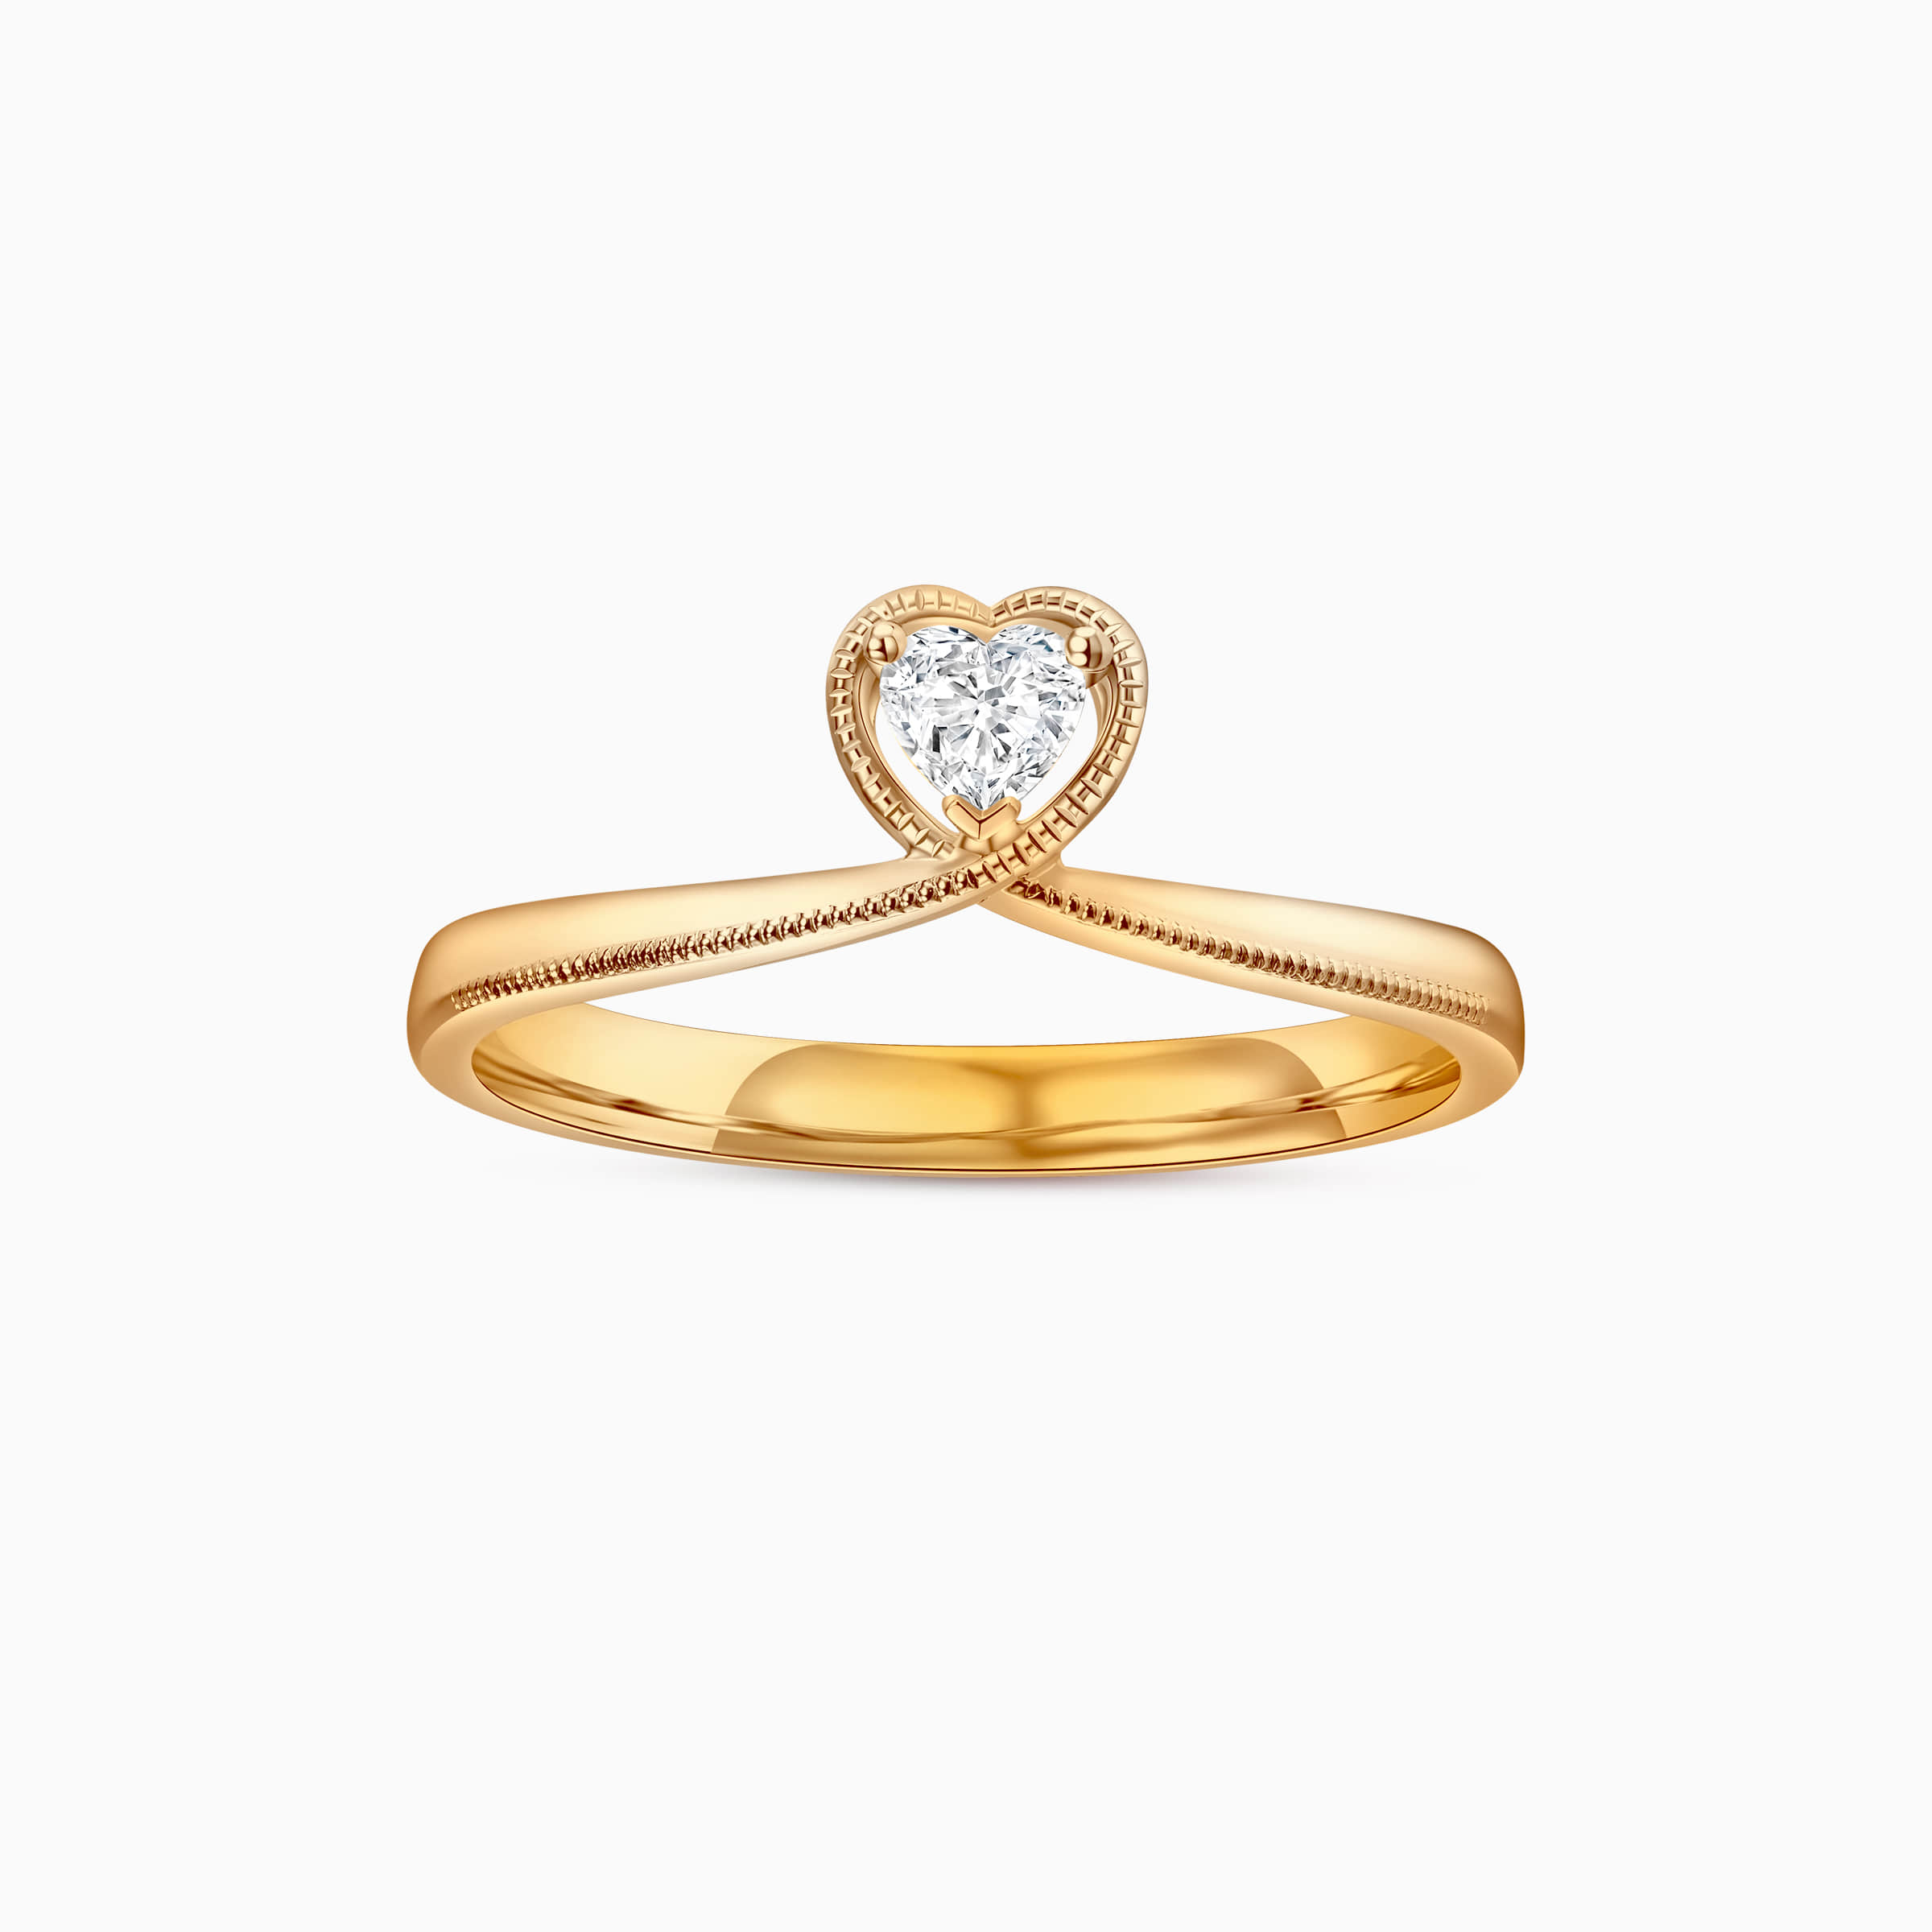 Darry Ring heart shaped promise ring yellow gold